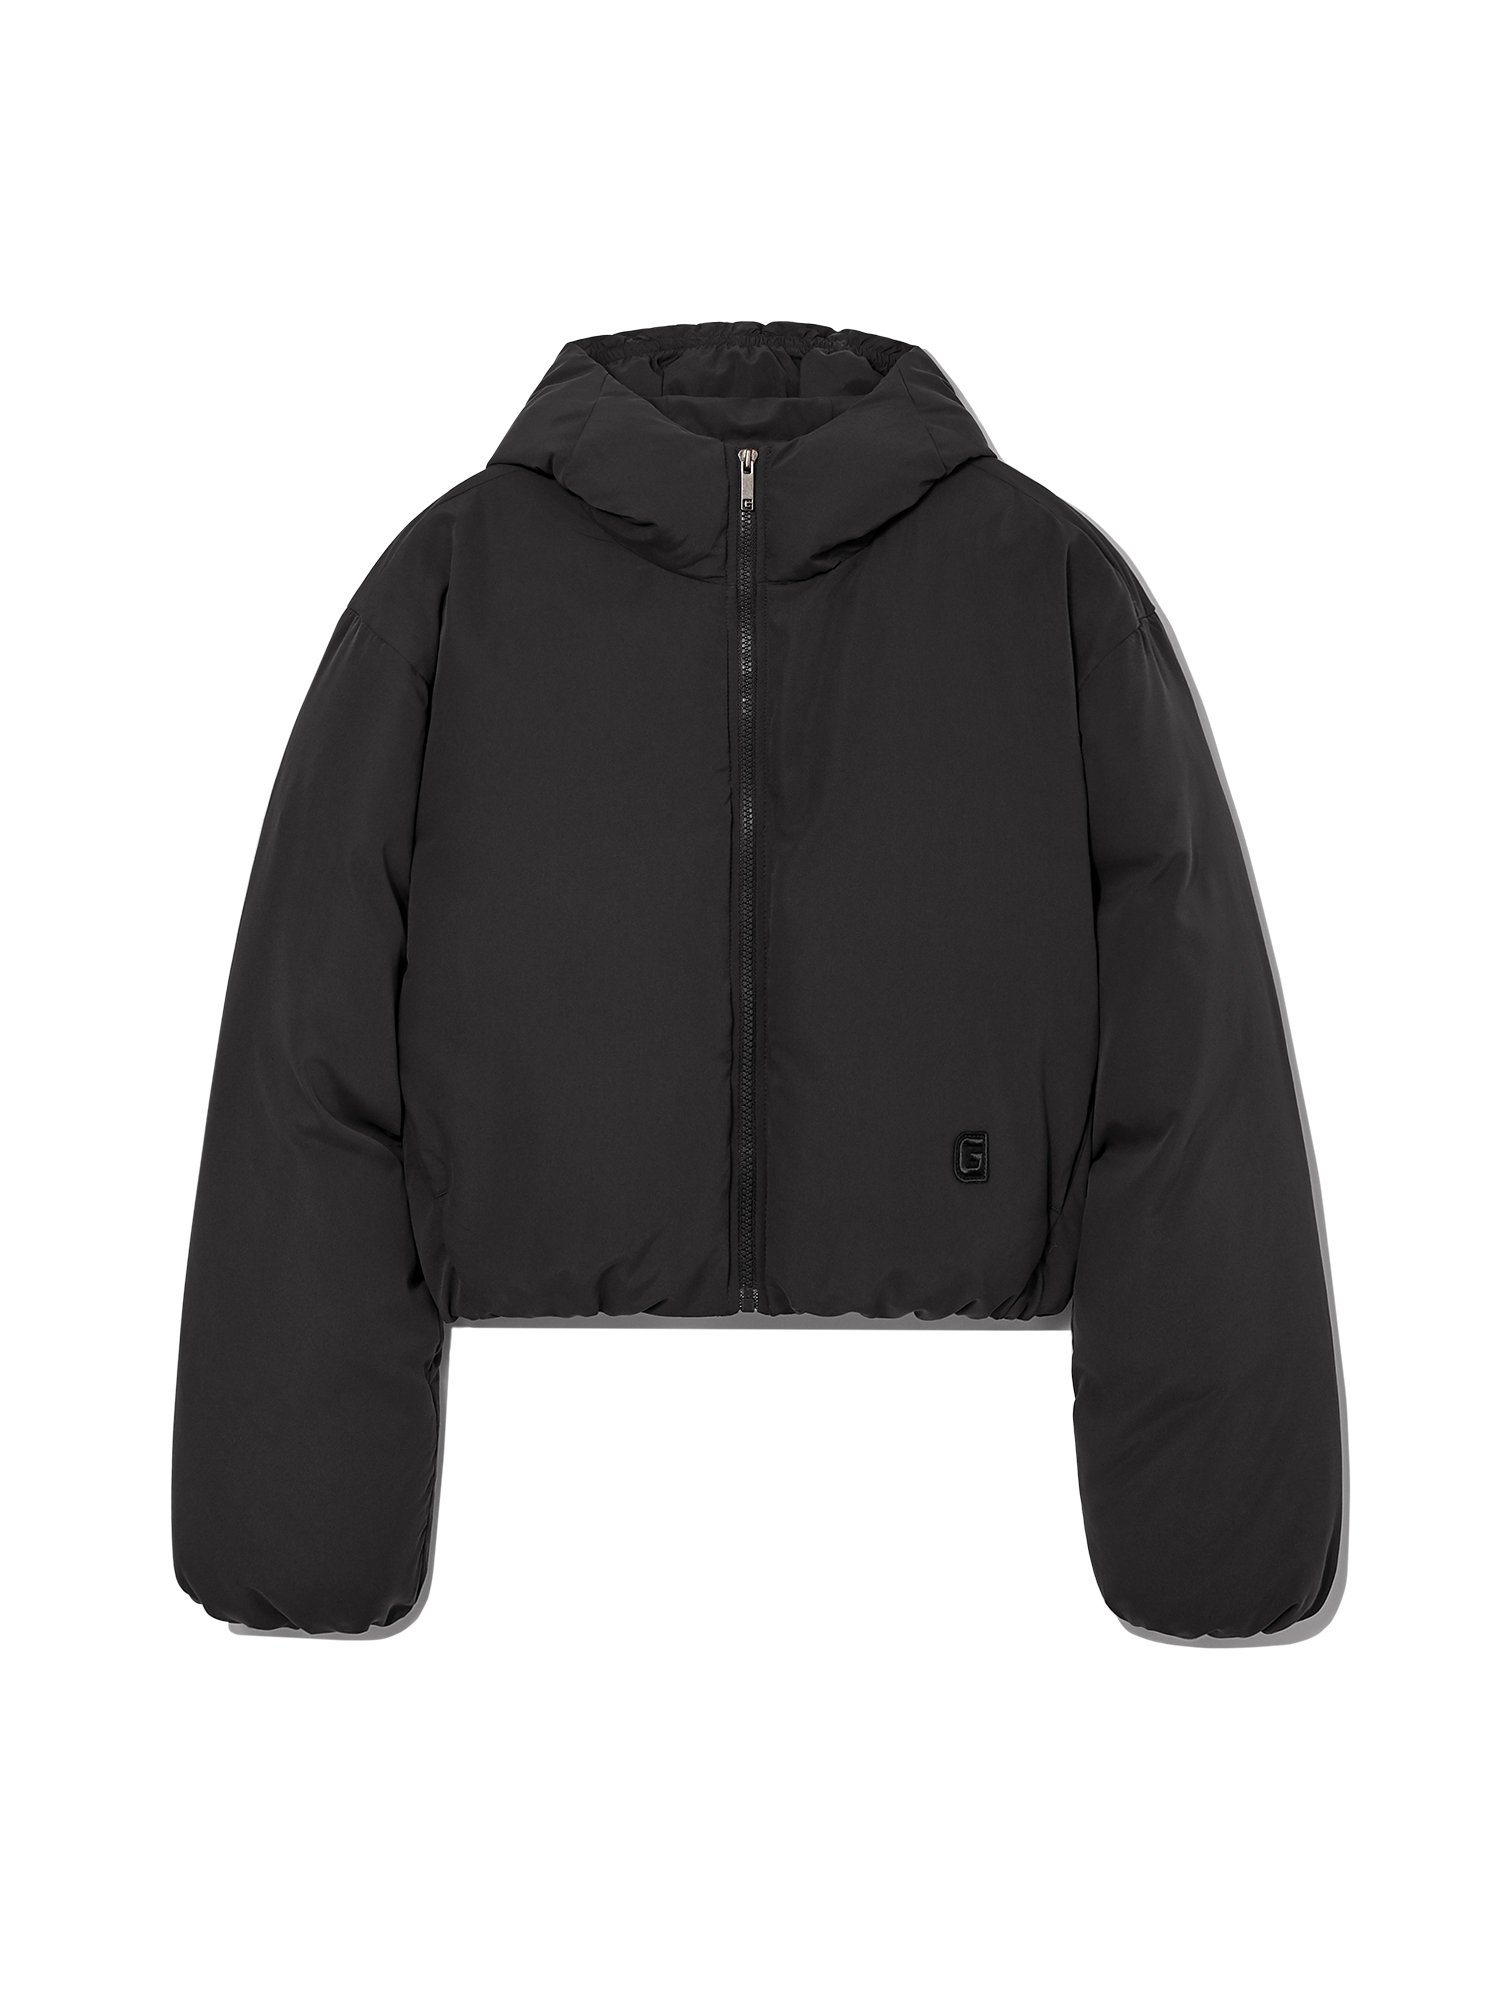 BOUNDERLESS DOWN PUFFER JACKET (CHARCOAL)